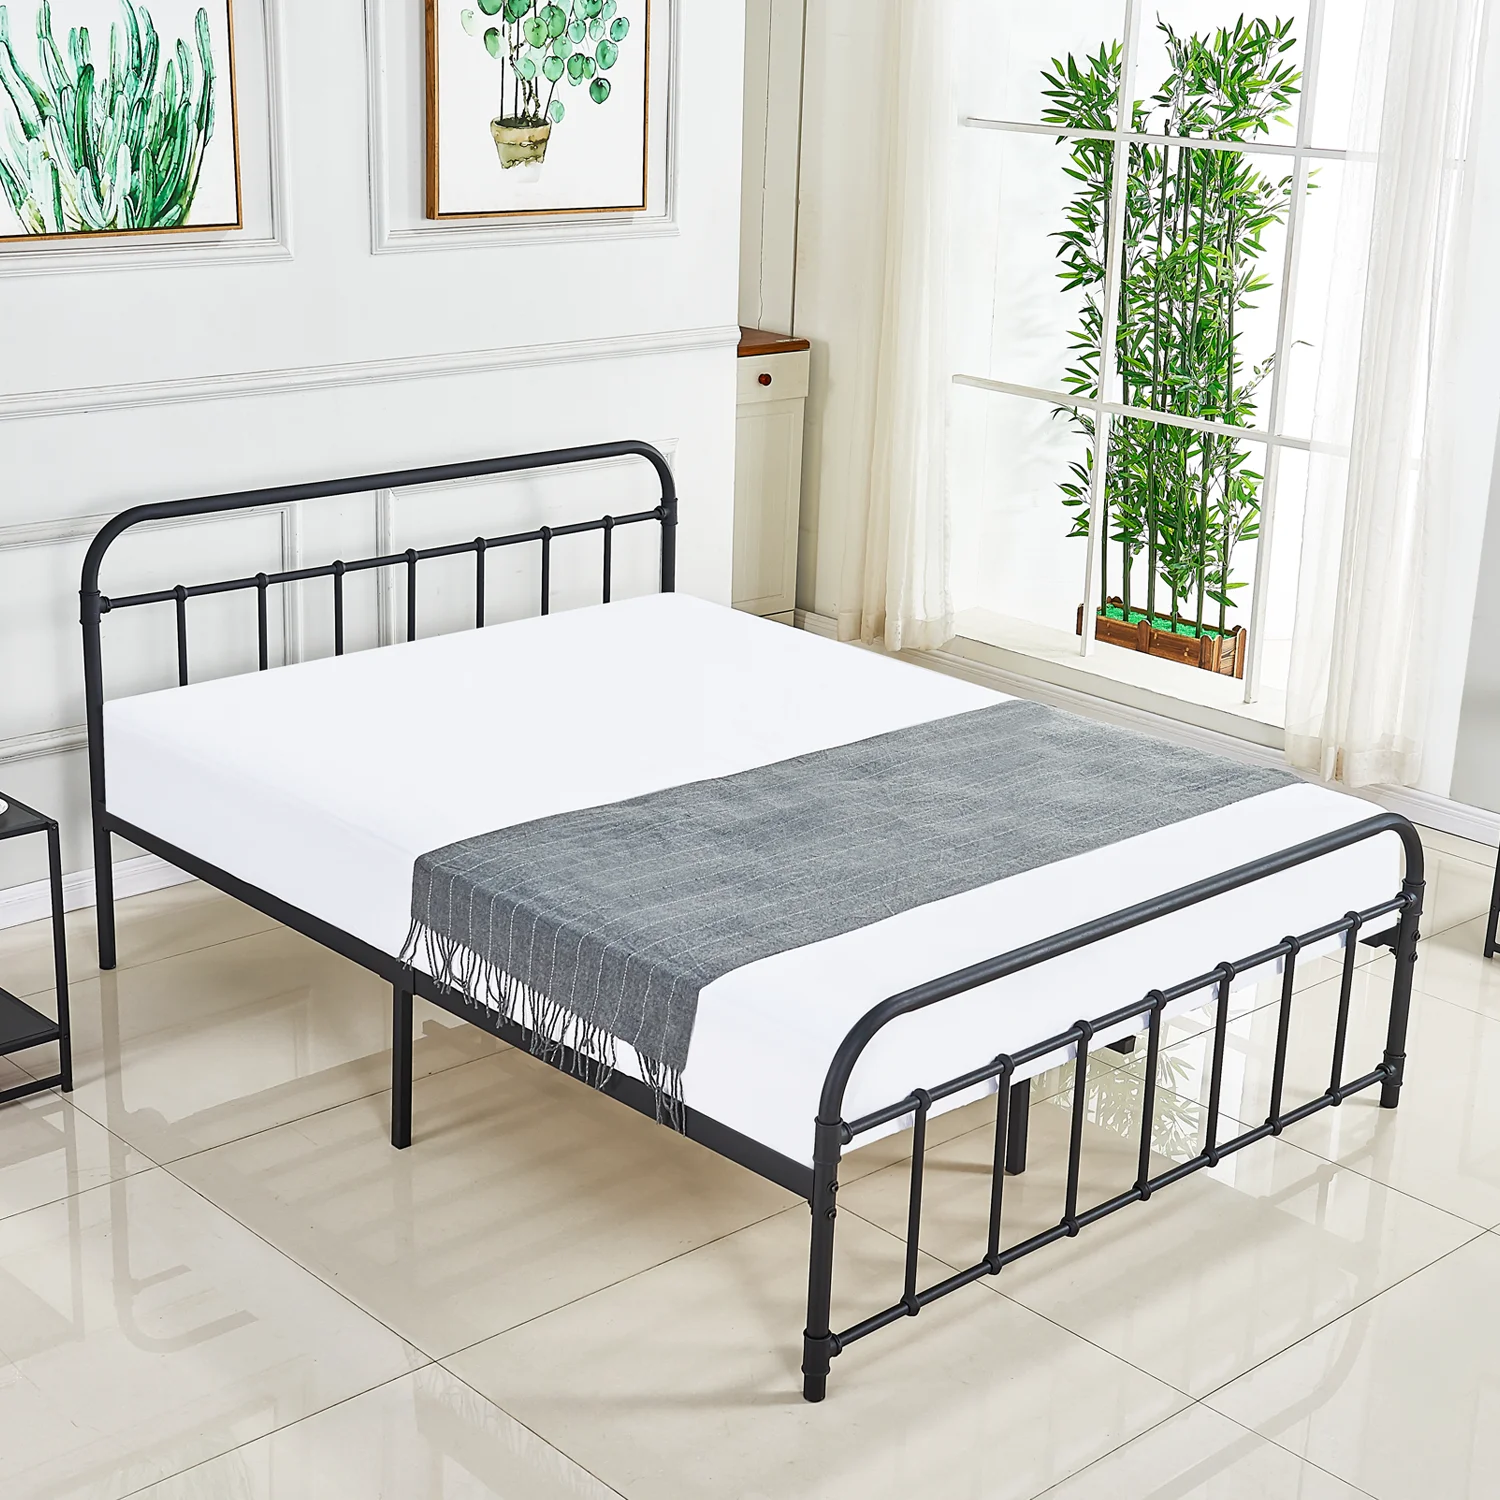 

Metal Bed Platform Queen Size Frame with Headboard/No Boxspring Needed/Mattress Foundation, Black